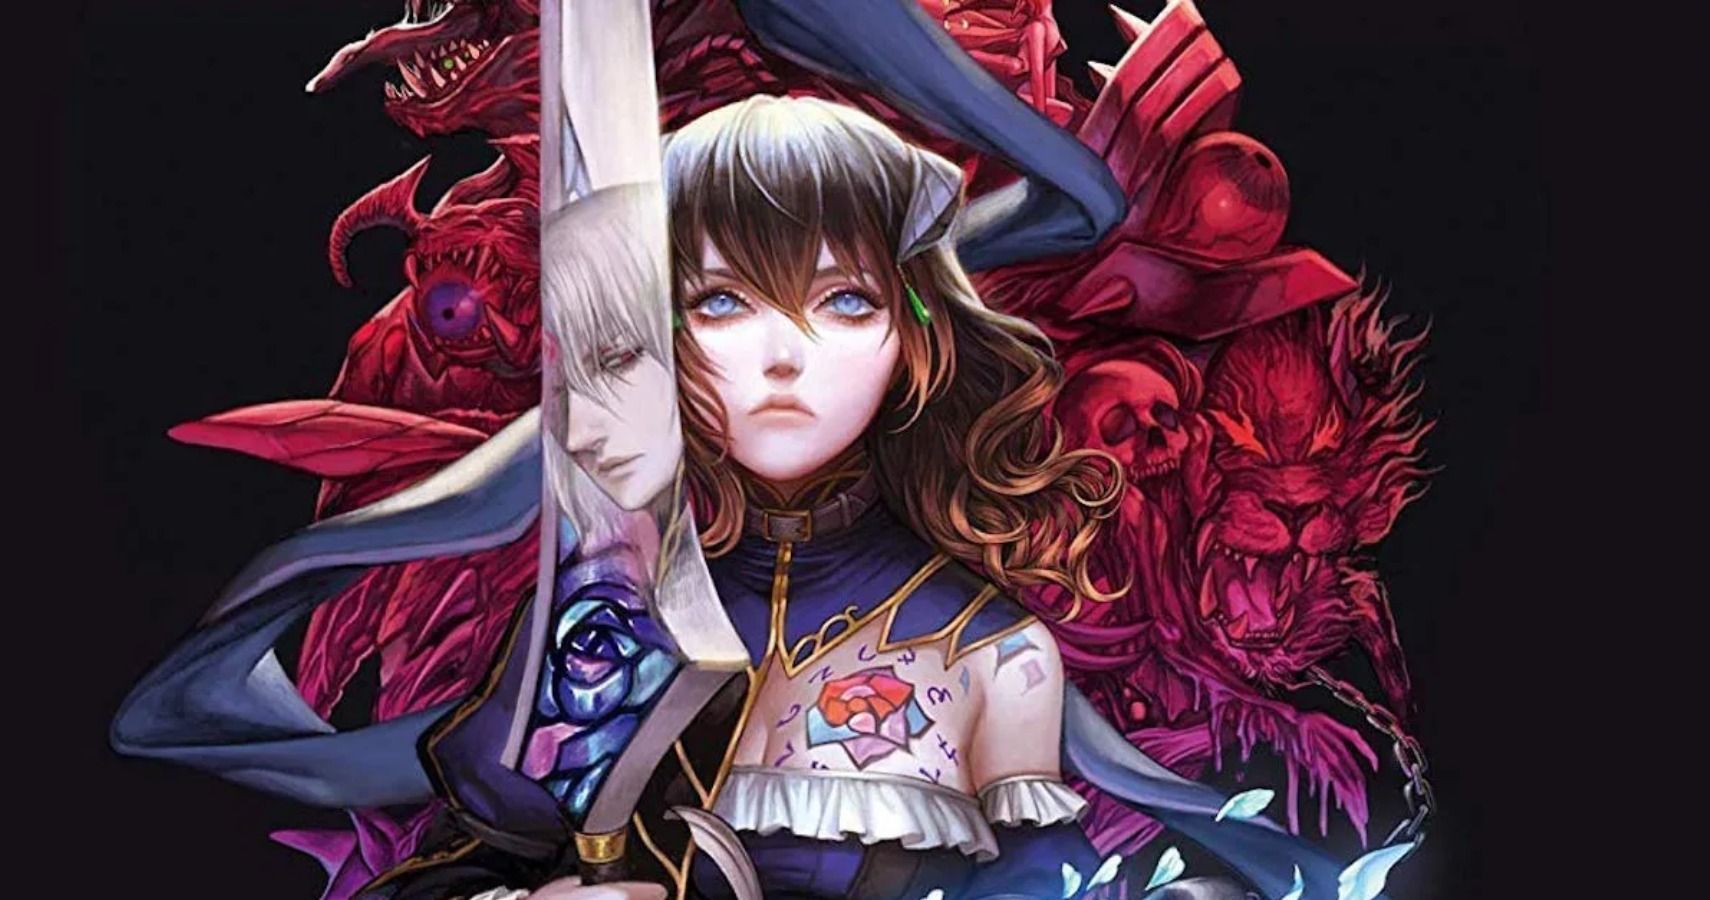 Bloodstained Ritual of the Night Will Receive A Randomizer Mode Instead Of A Roguelike Dungeon